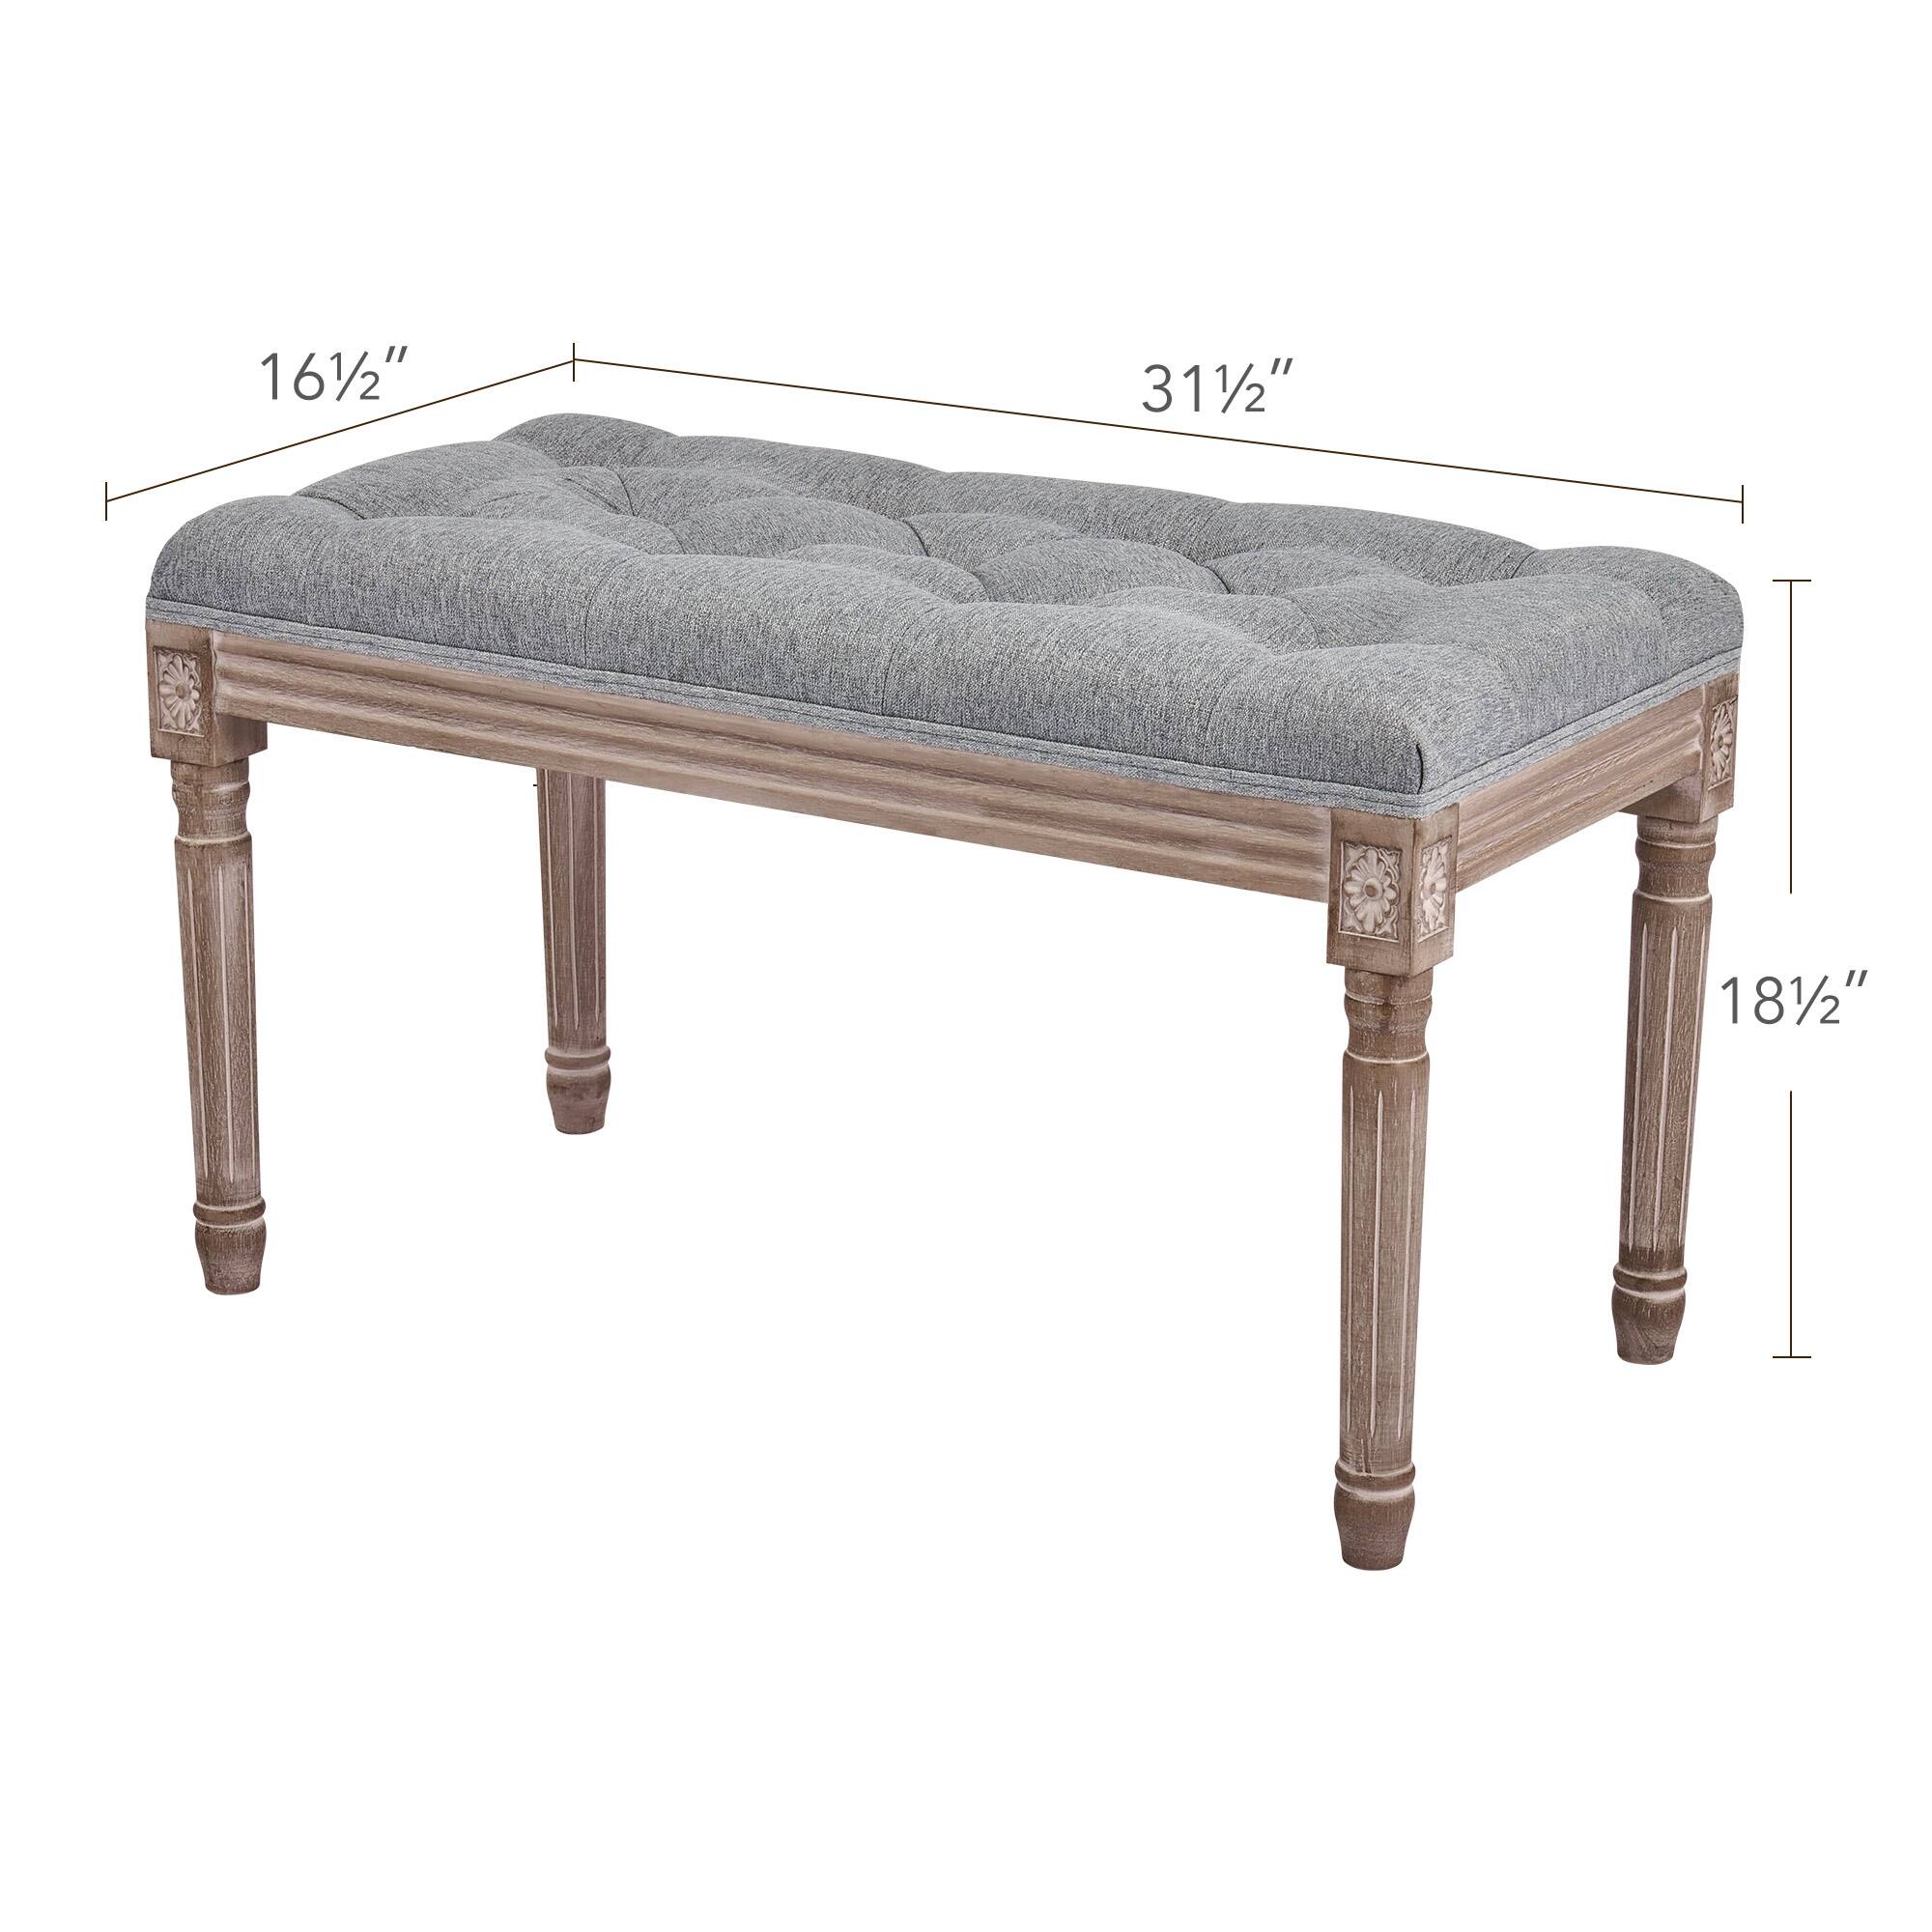 CO-Z French Vintage Upholstered Bench with Carved Solid Wood Frame - Grey